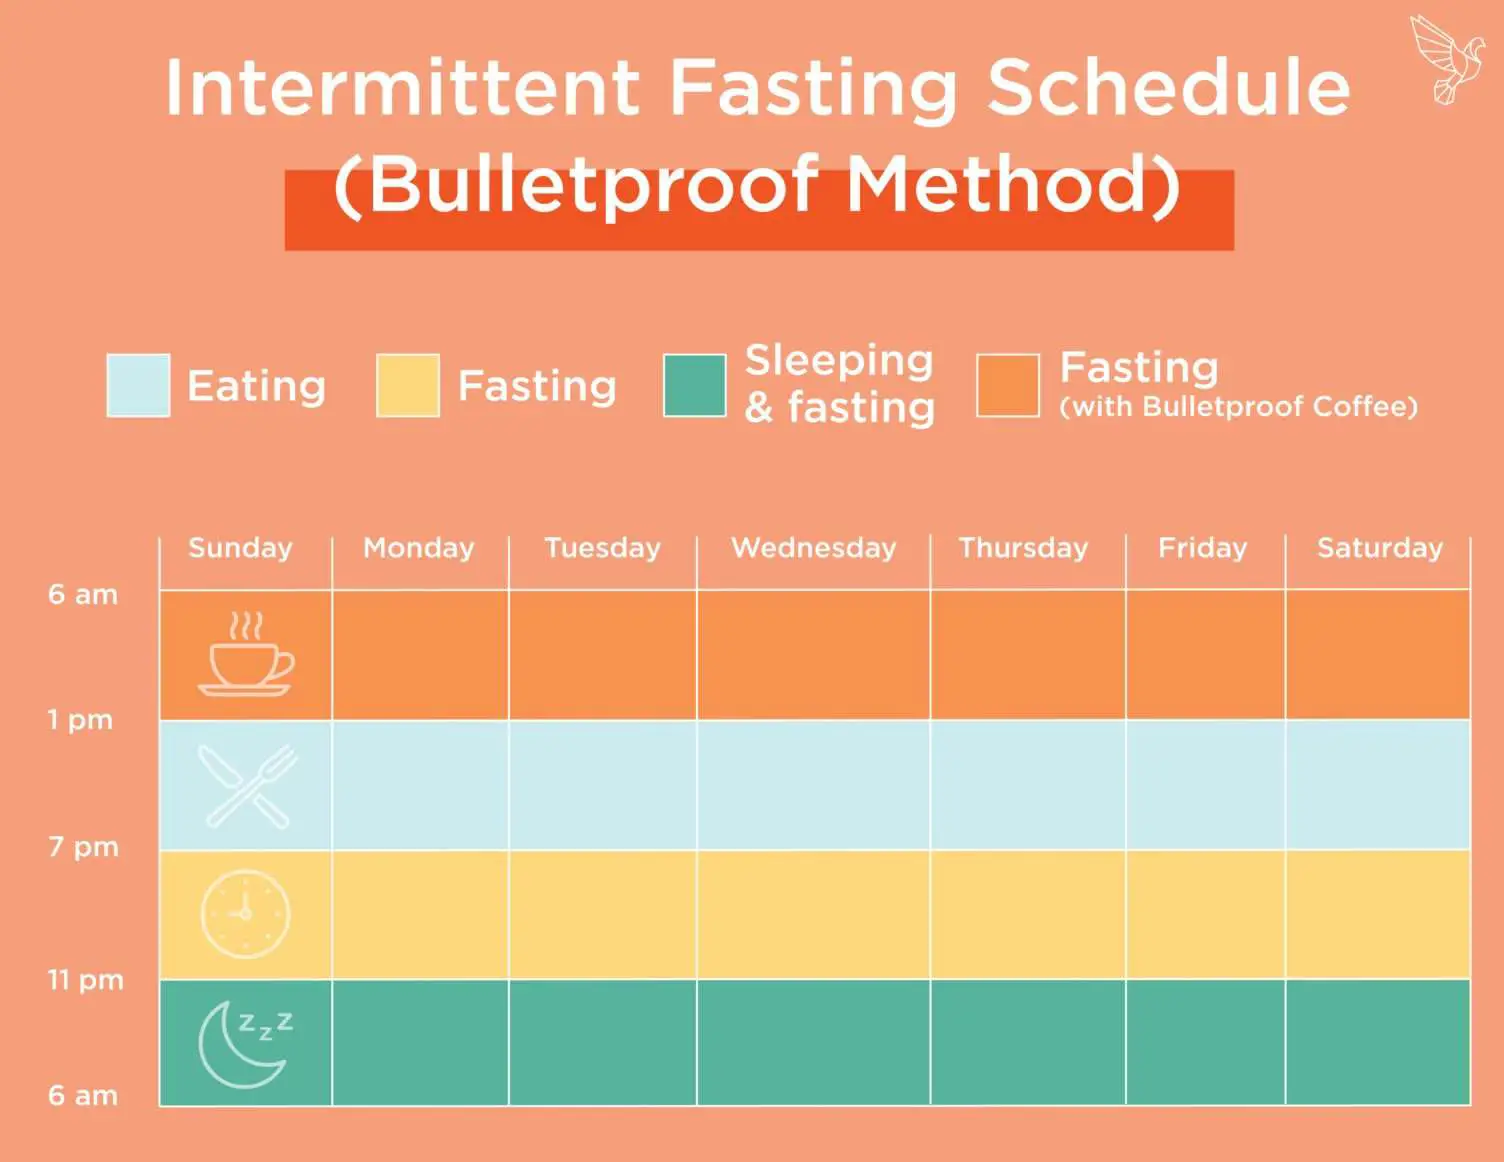 The Complete Intermittent Fasting Guide for Beginners